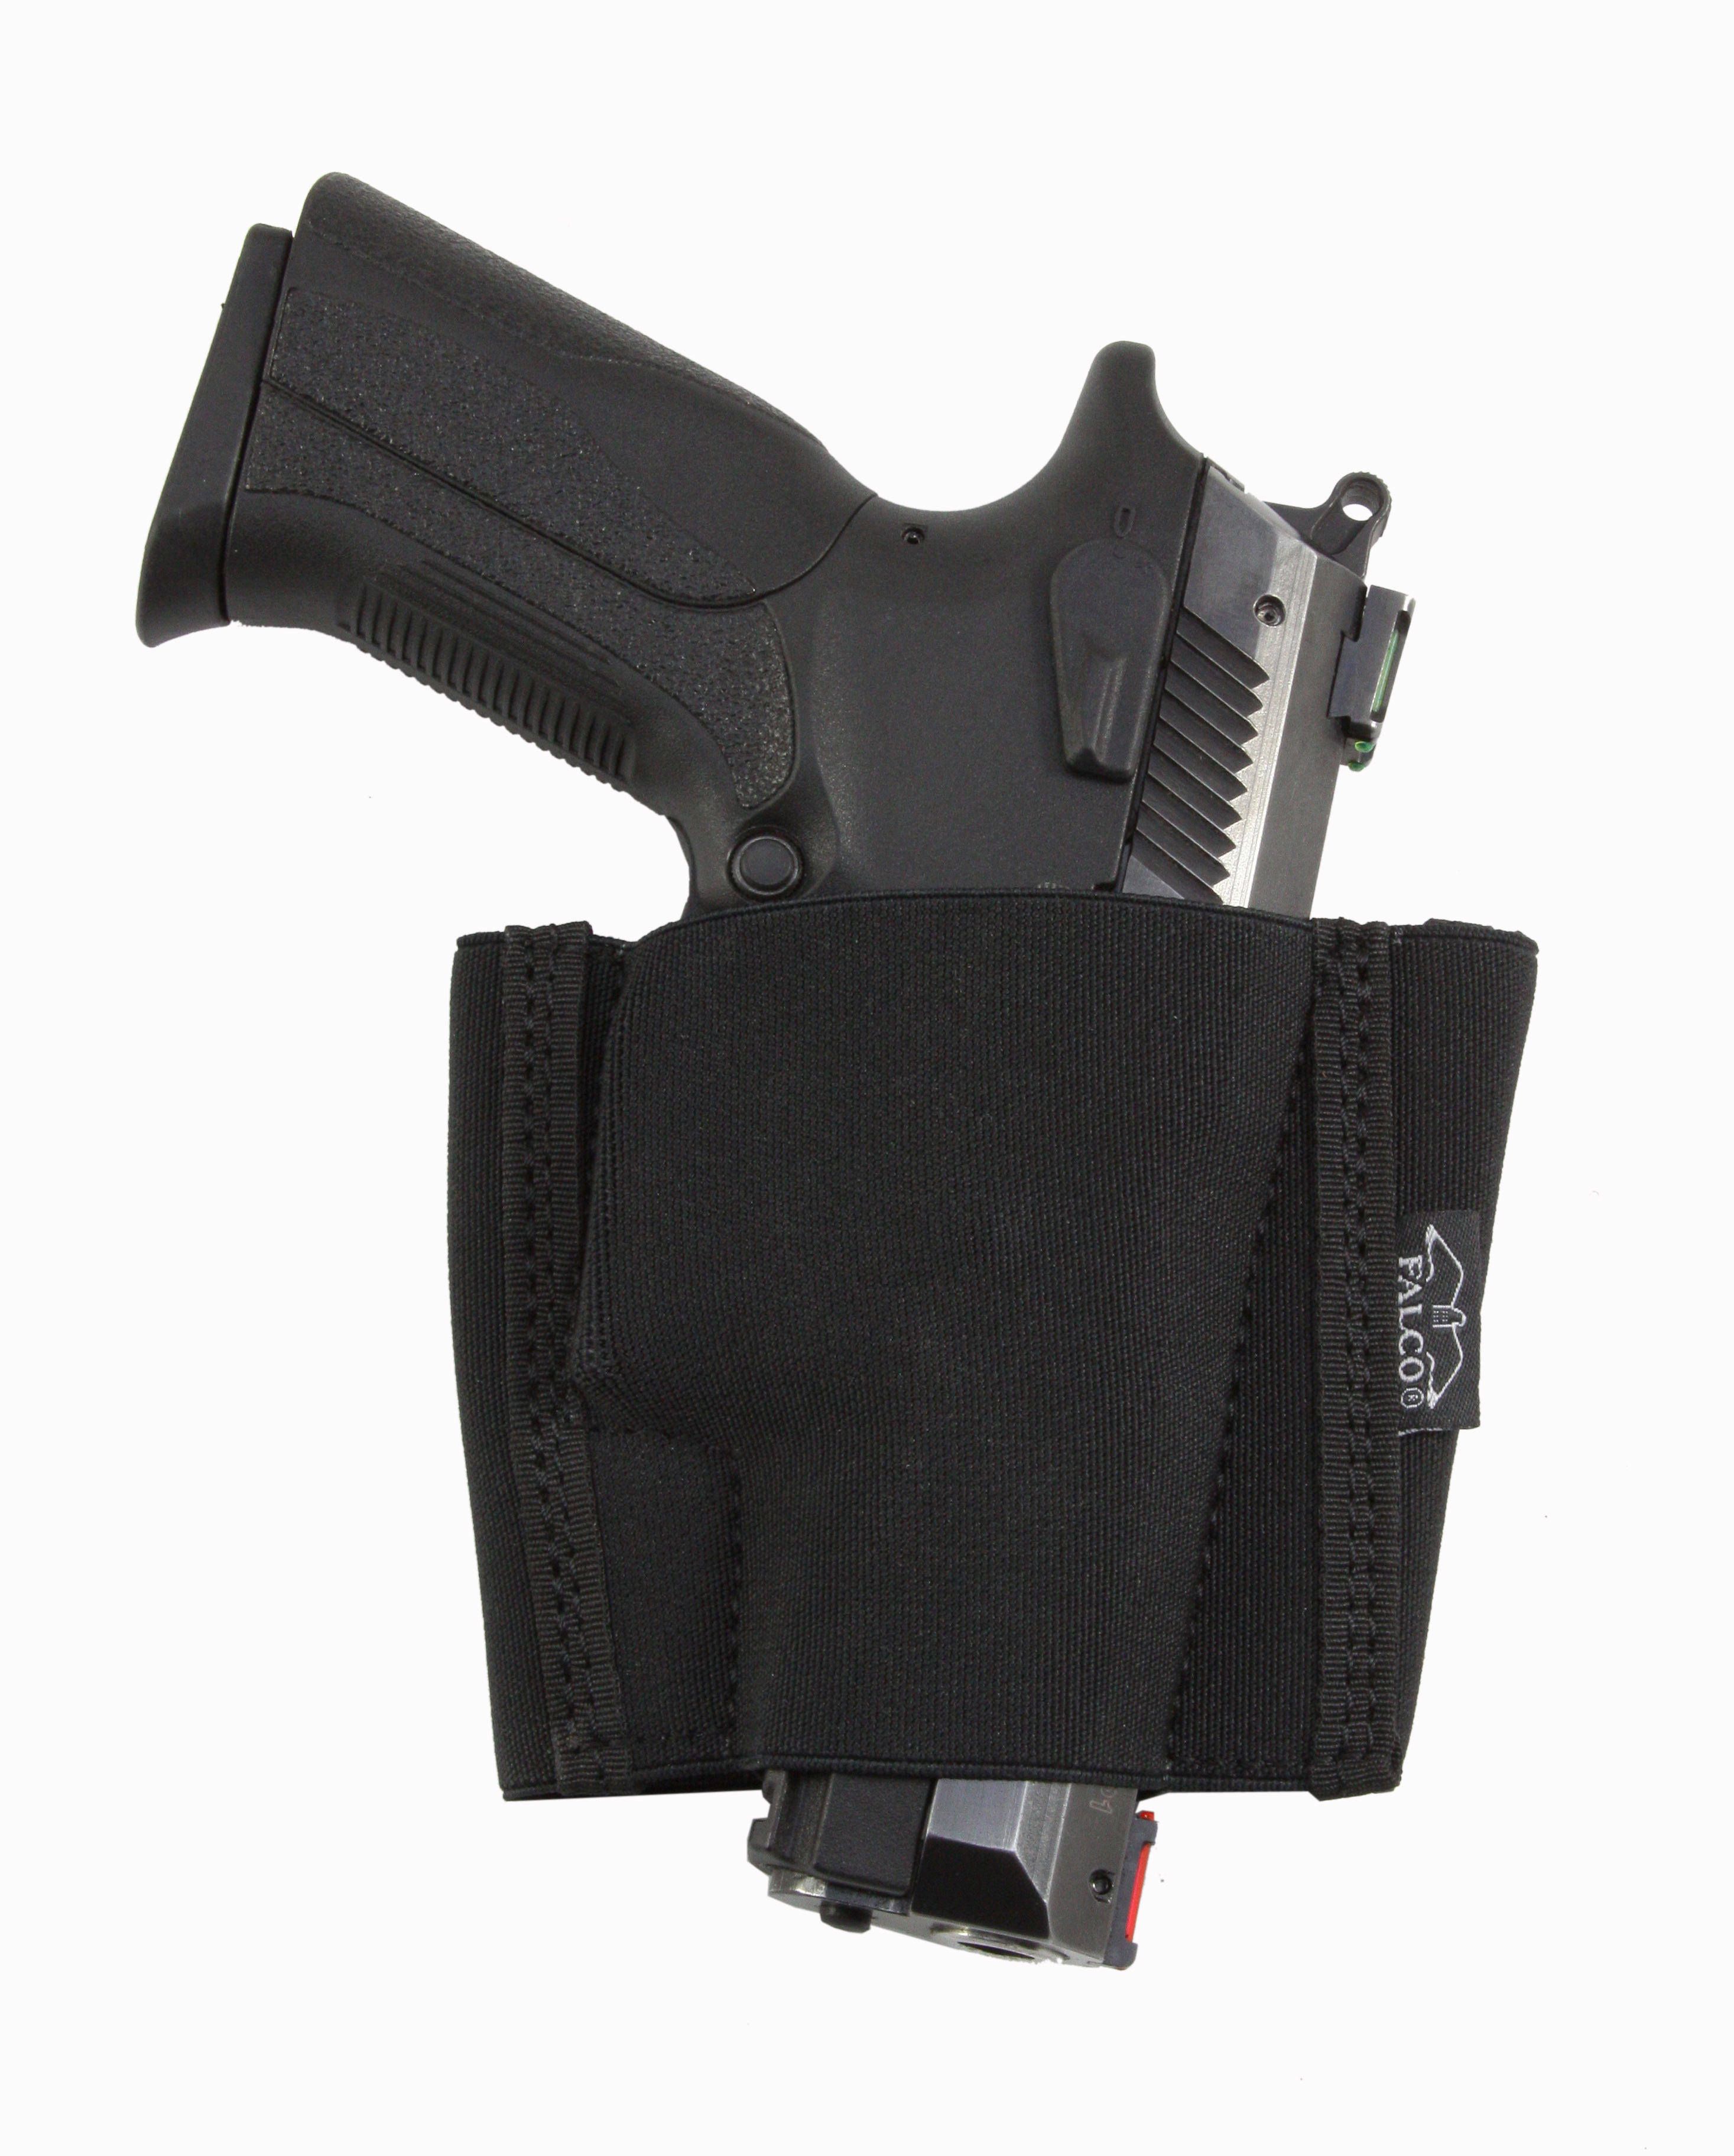 Universal Ankle Holster with Mag Holster fits Small Guns US STOCK 